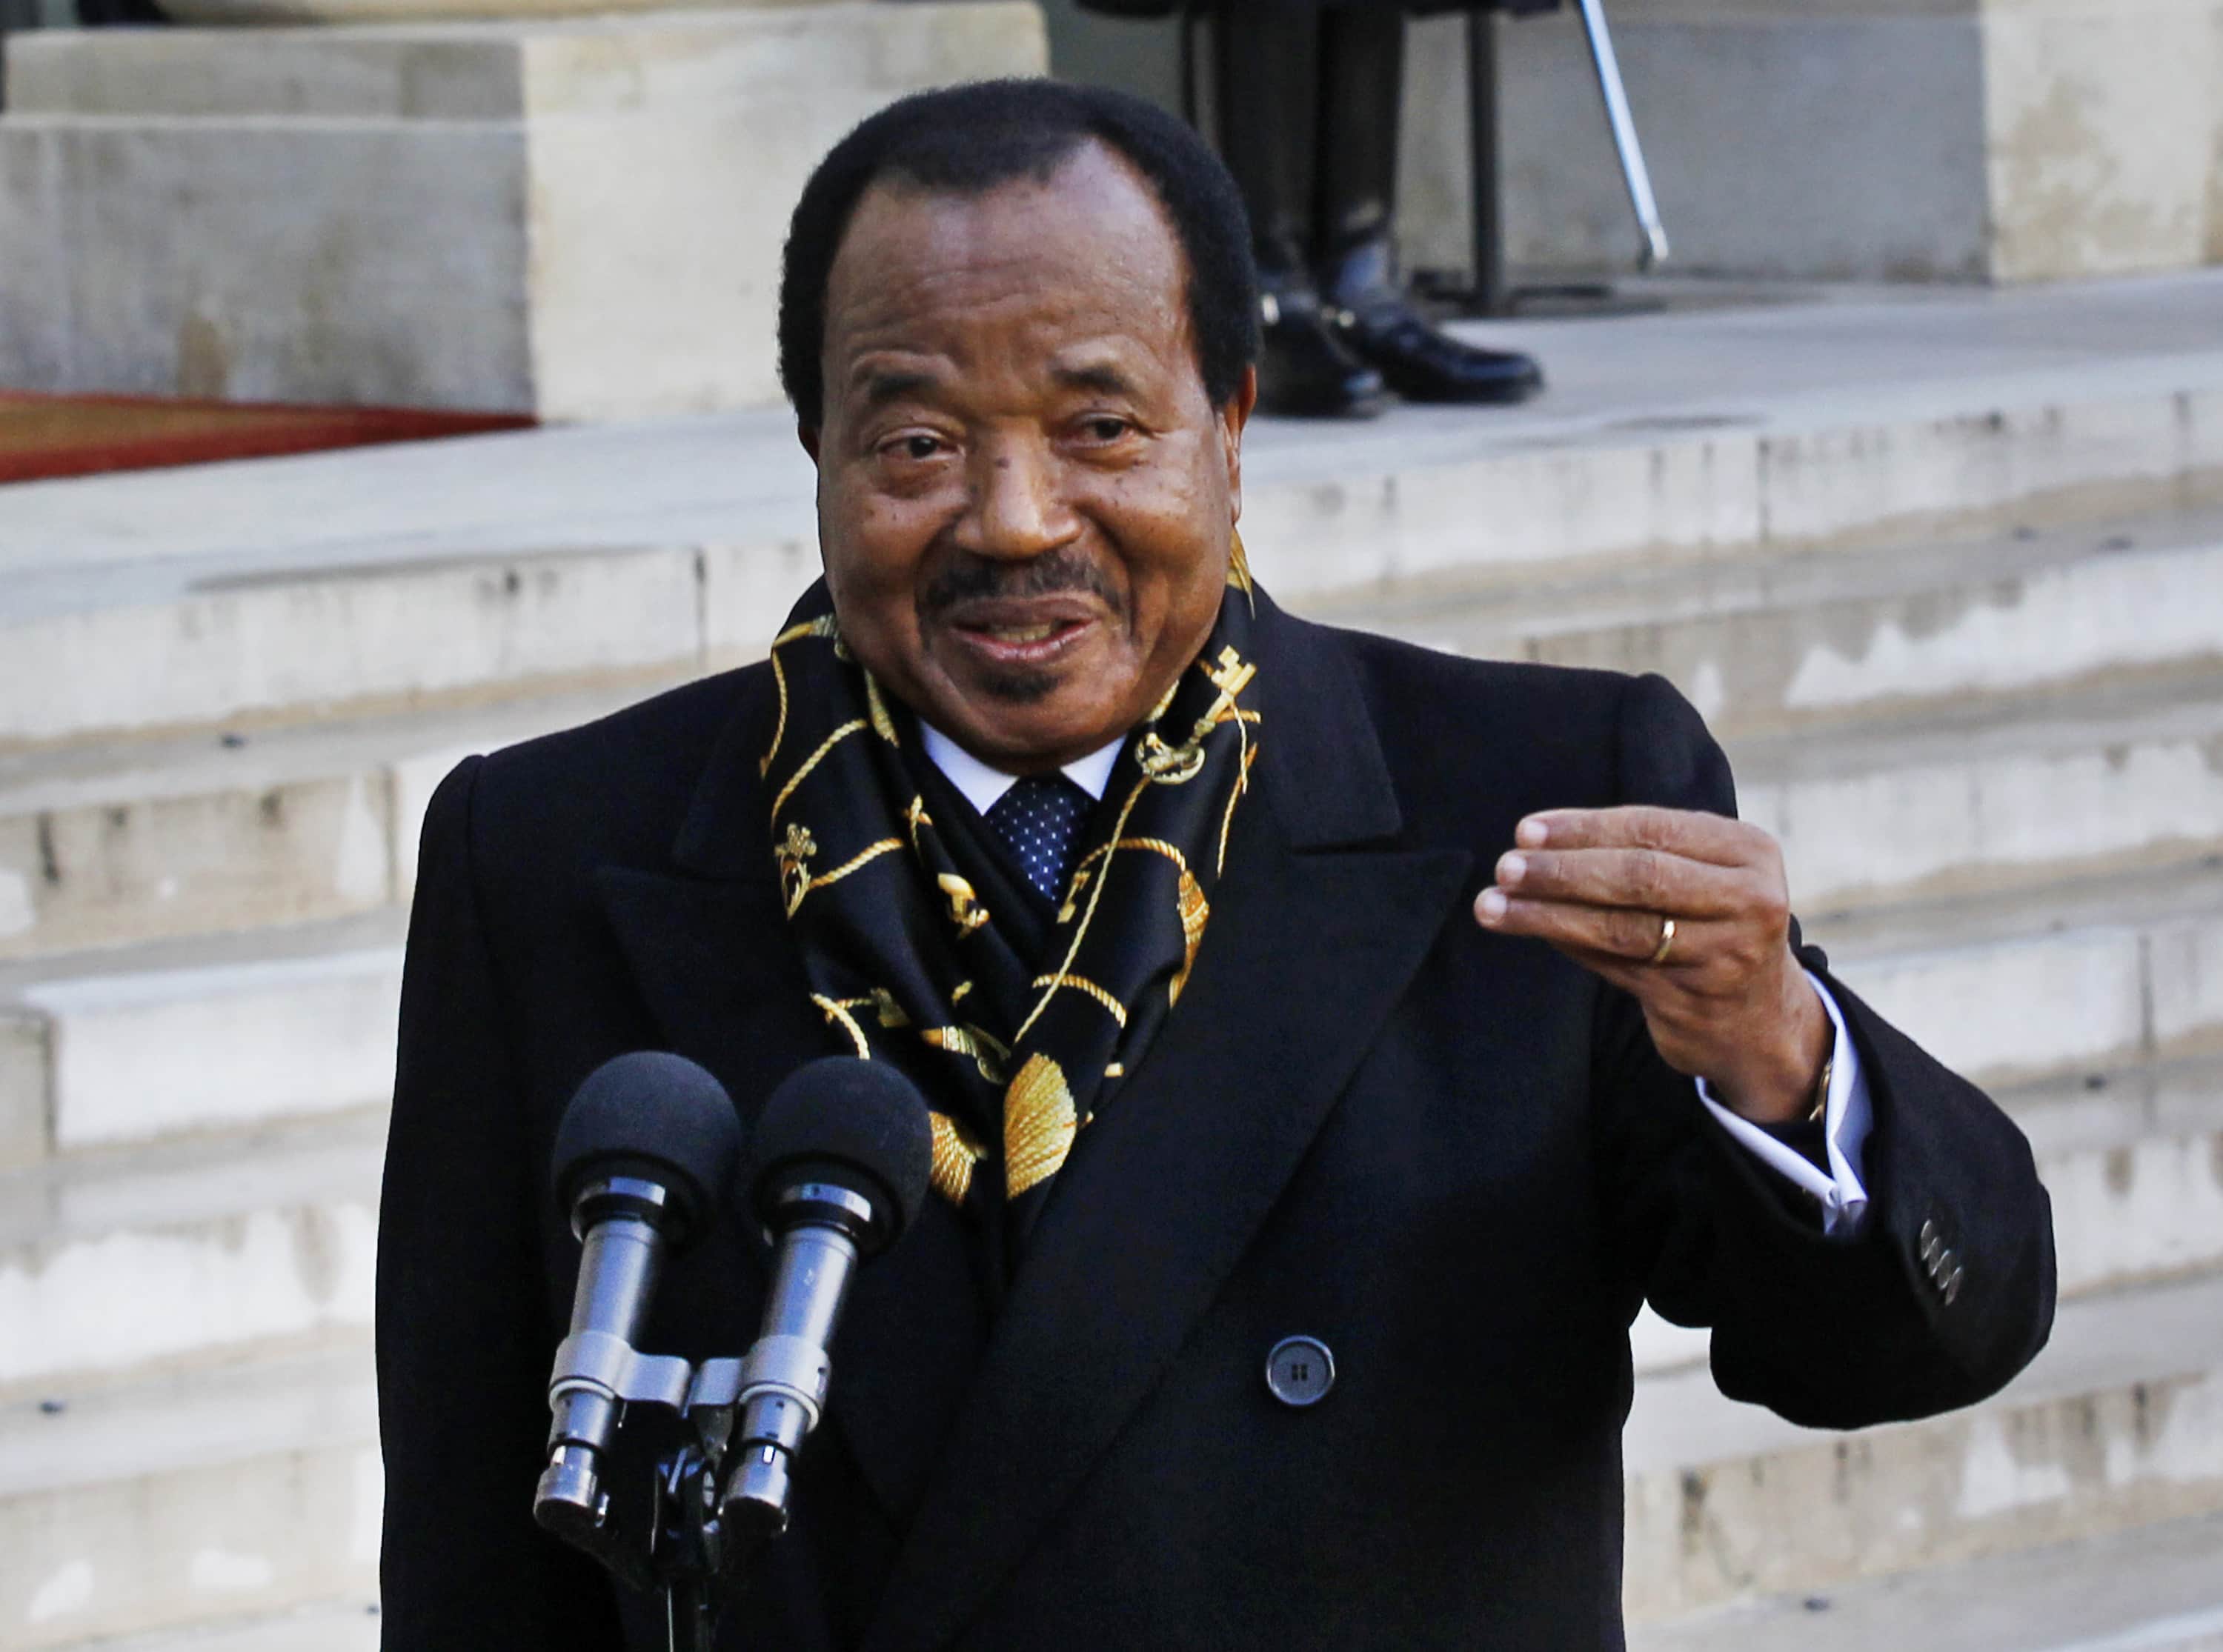 Cameroon's President Paul Biya addresses reporters following his meeting with French President Francois Hollande in January 2013, AP Photo/Remy de la Mauviniere, File